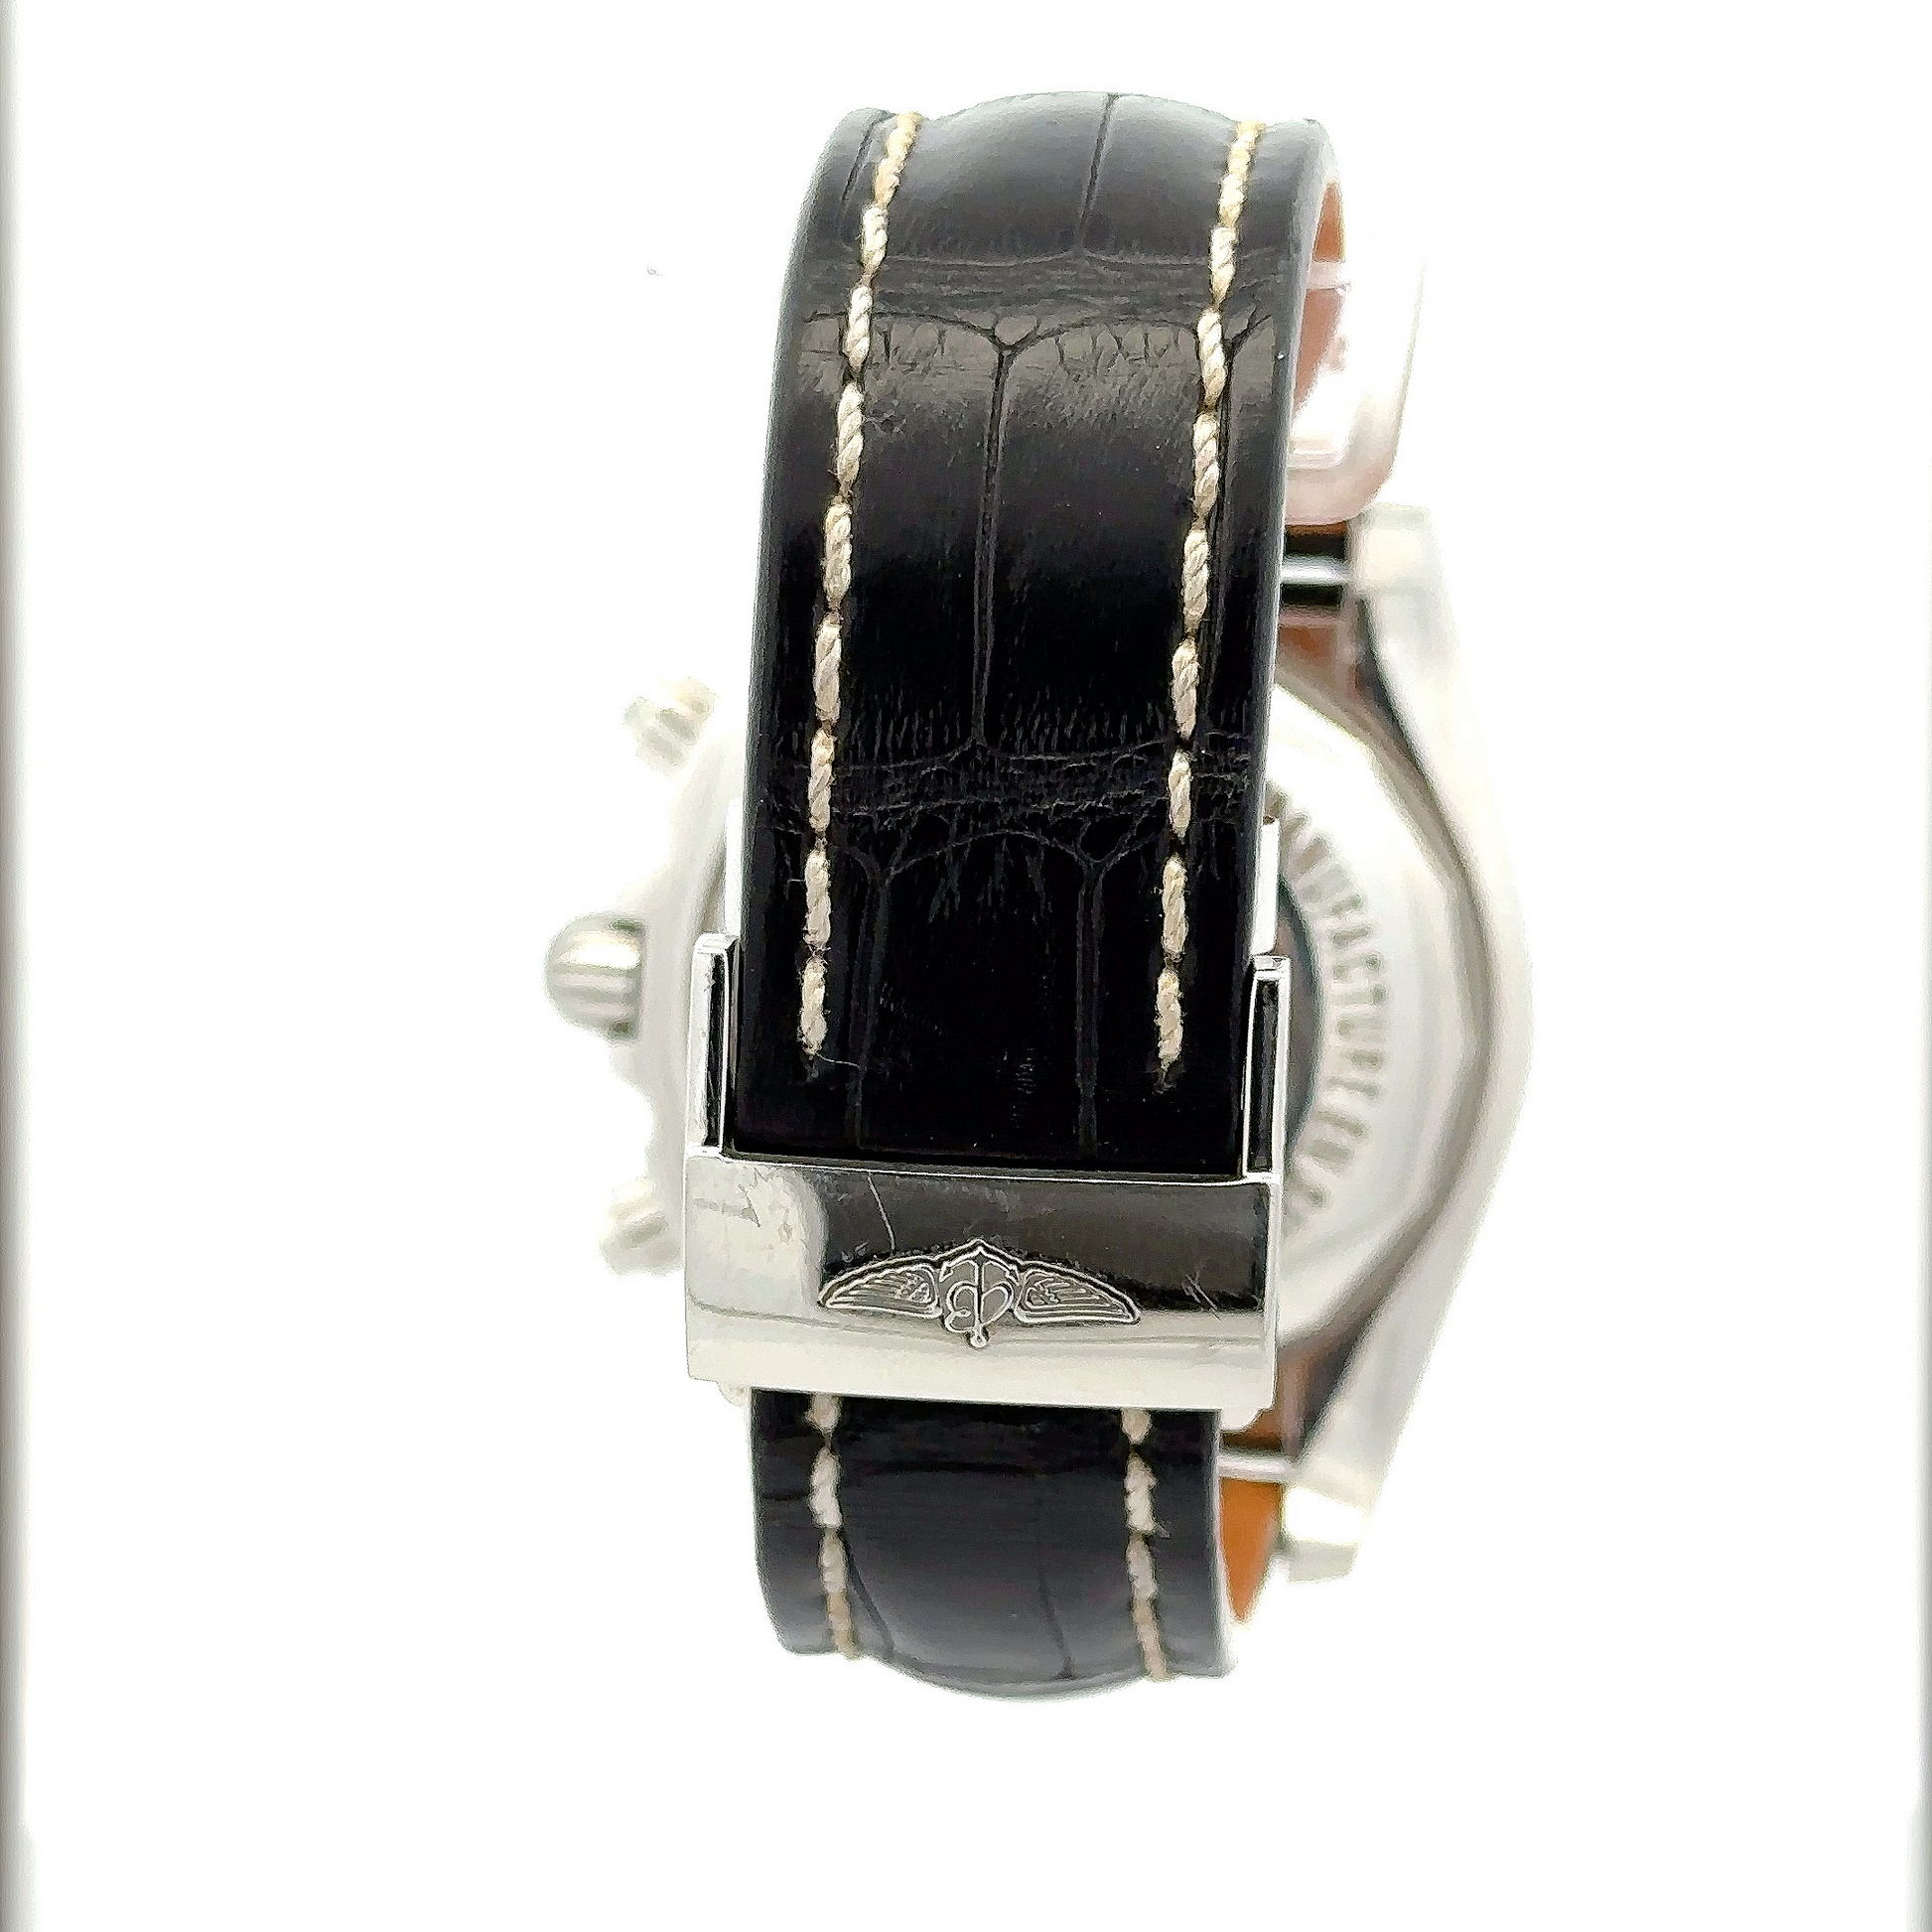 Back of the watch showing the leather band and the stainless steel clasp that holds the band. Black leather band shows wear. Clasp shows scratches.